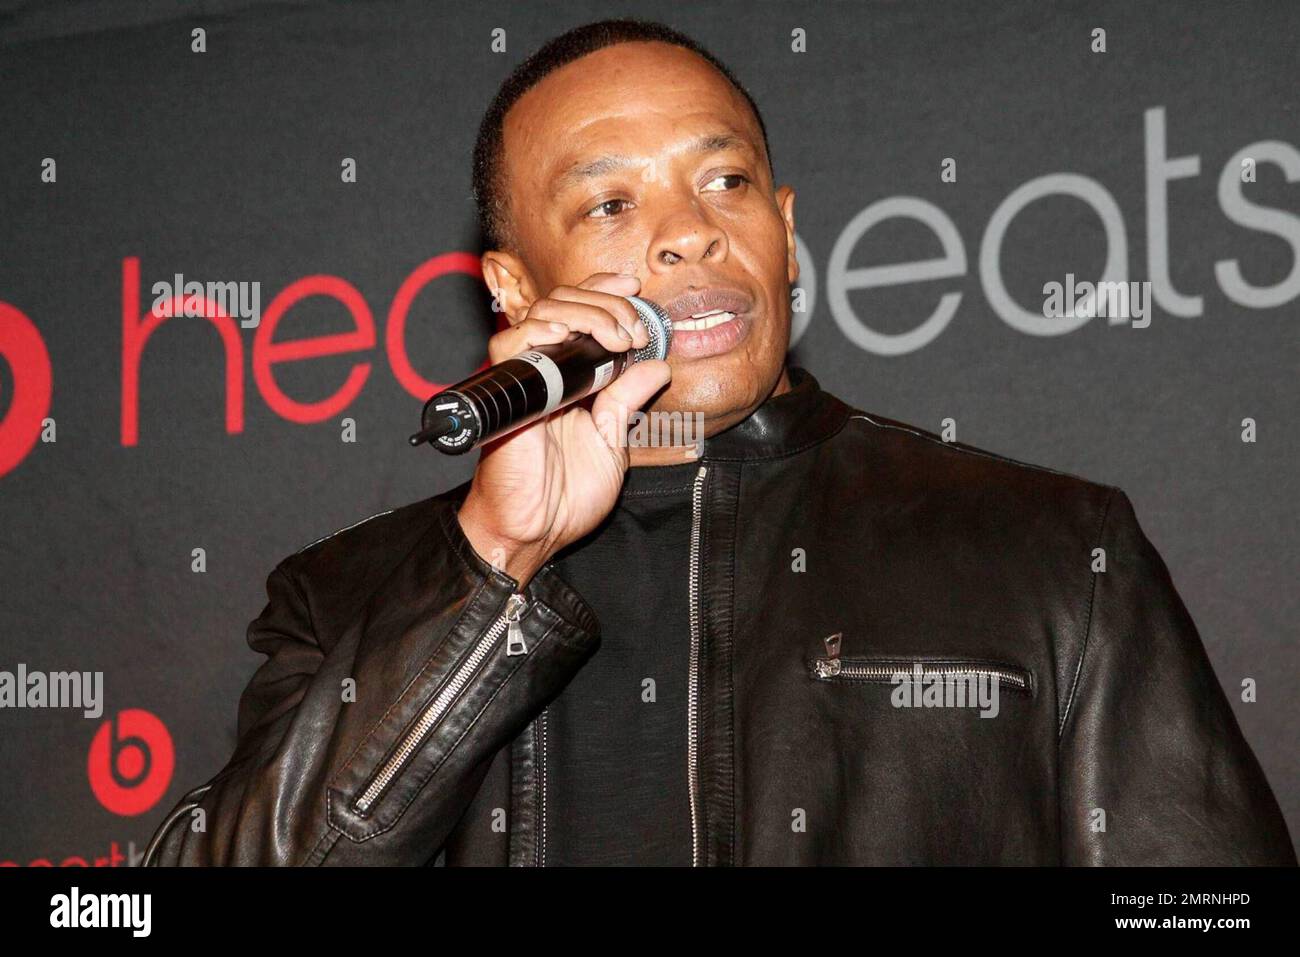 Dr. Dre attends the Heartbeats by Lady Gaga headphones unveiling at GILT at The New York Palace Hotel in New York, NY. 9/30/09. Stock Photo